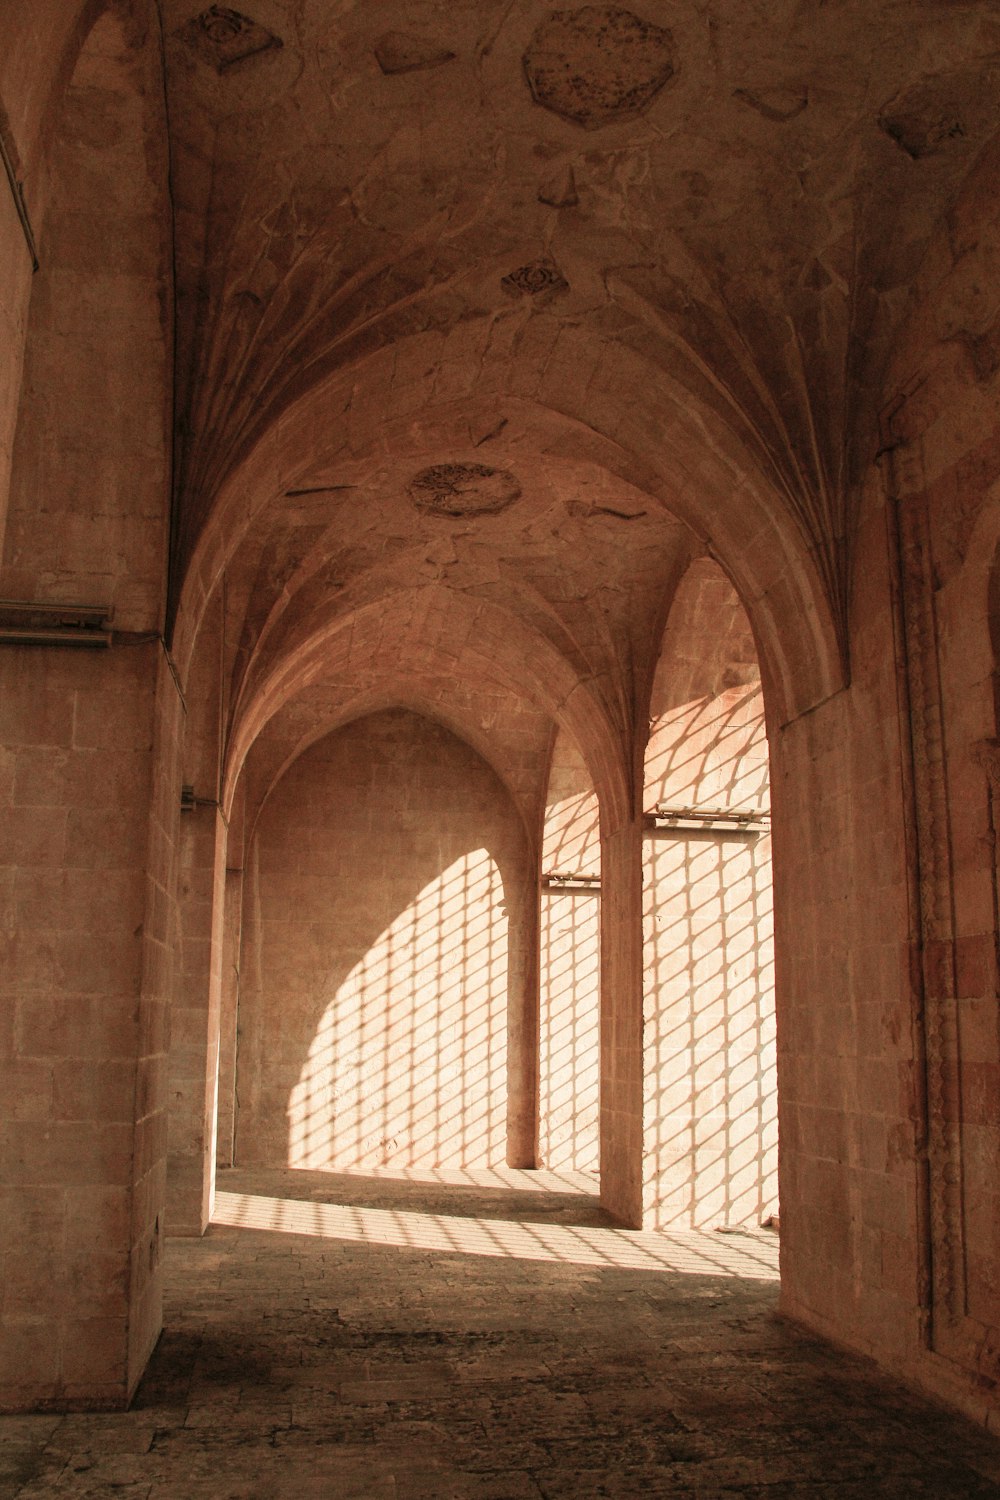 a long hallway with arched walls and a clock on the wall